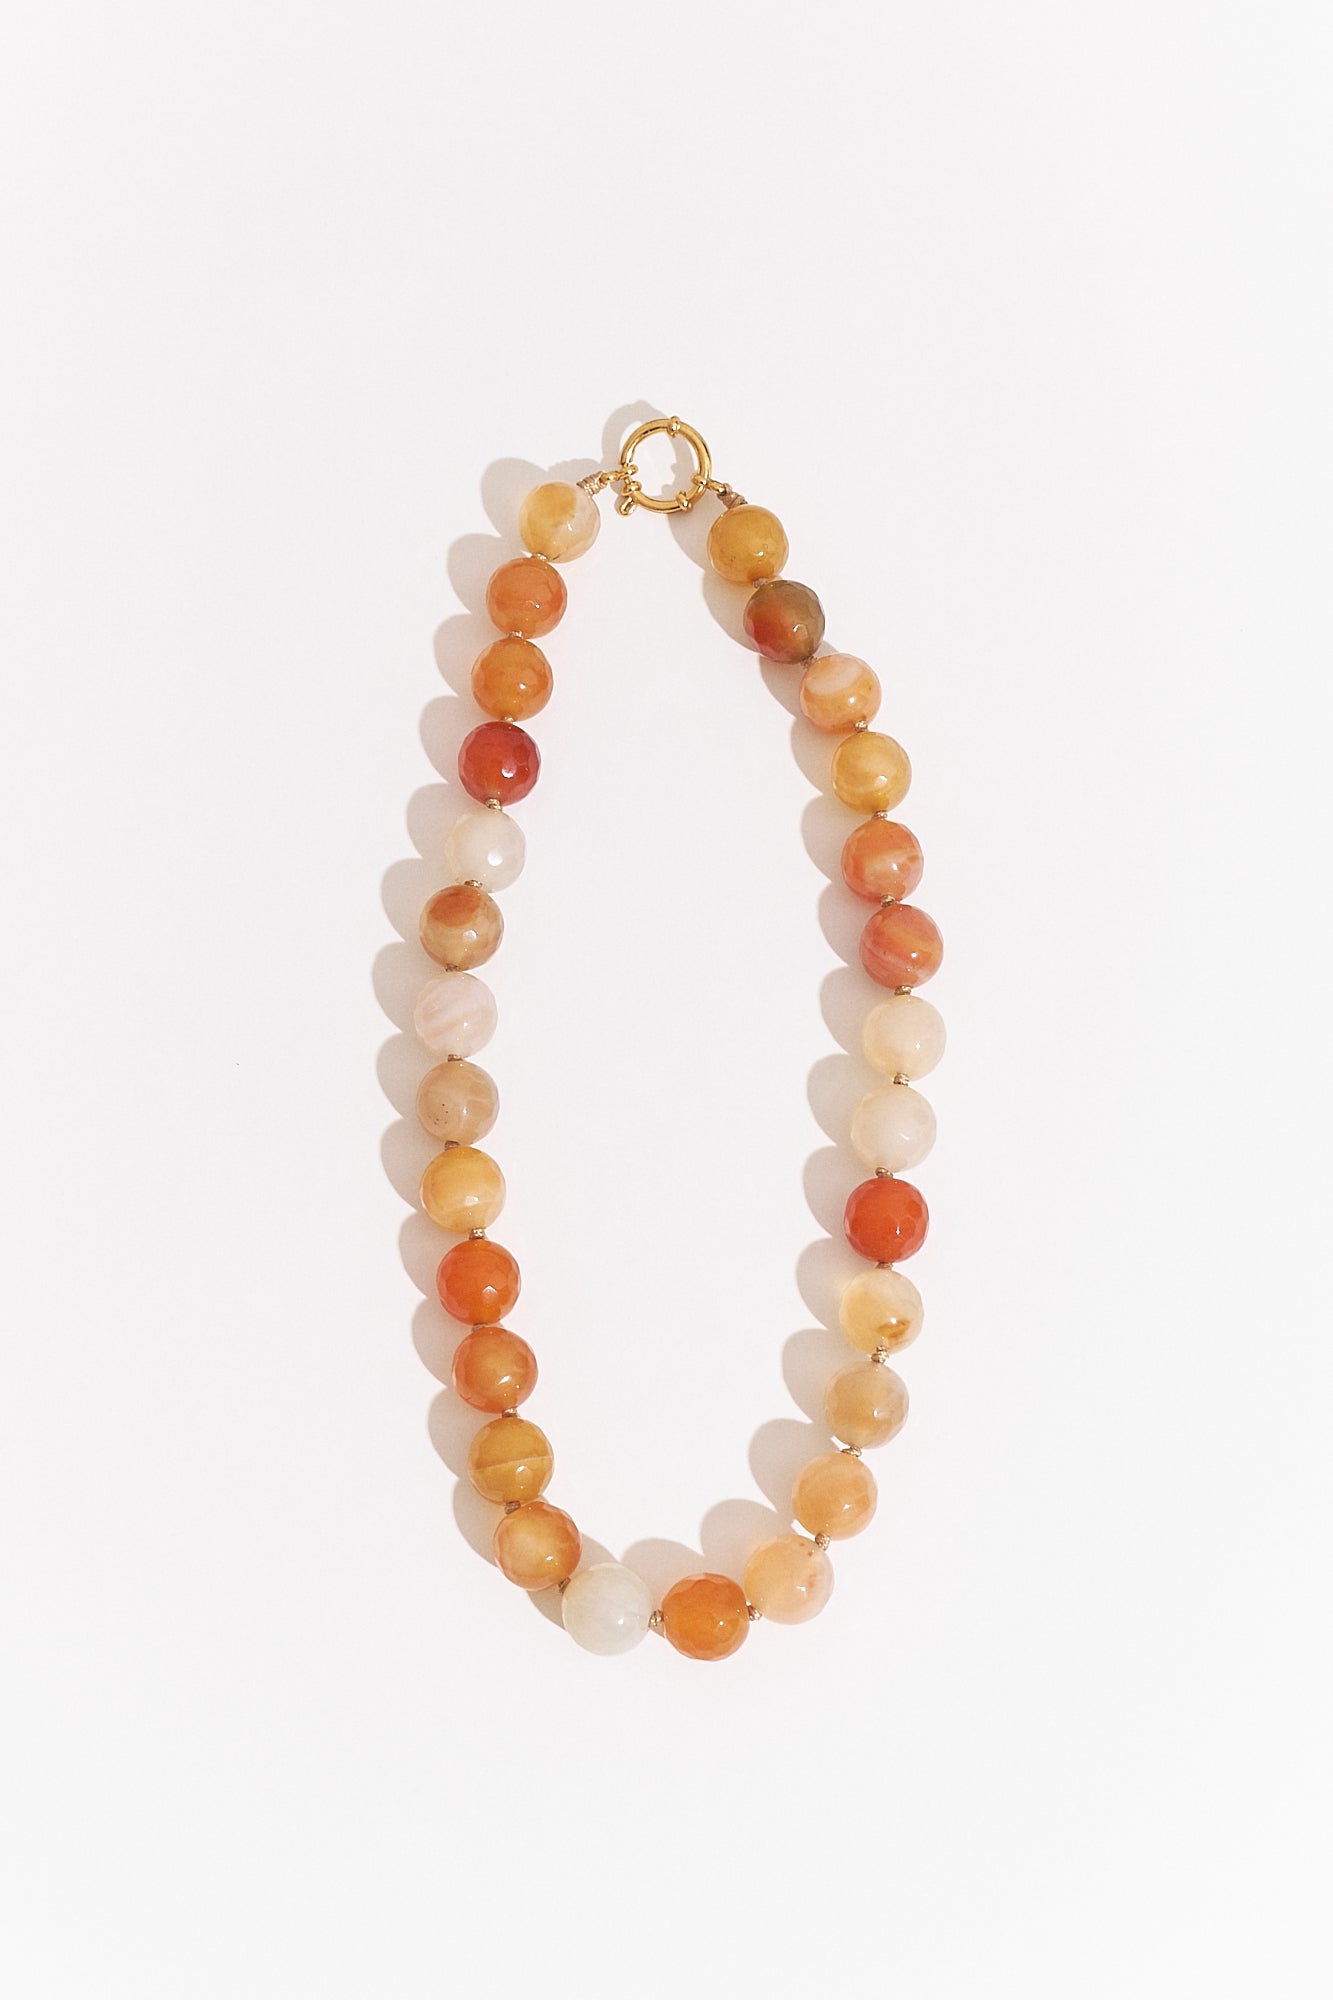 Terracotta Agate Necklace